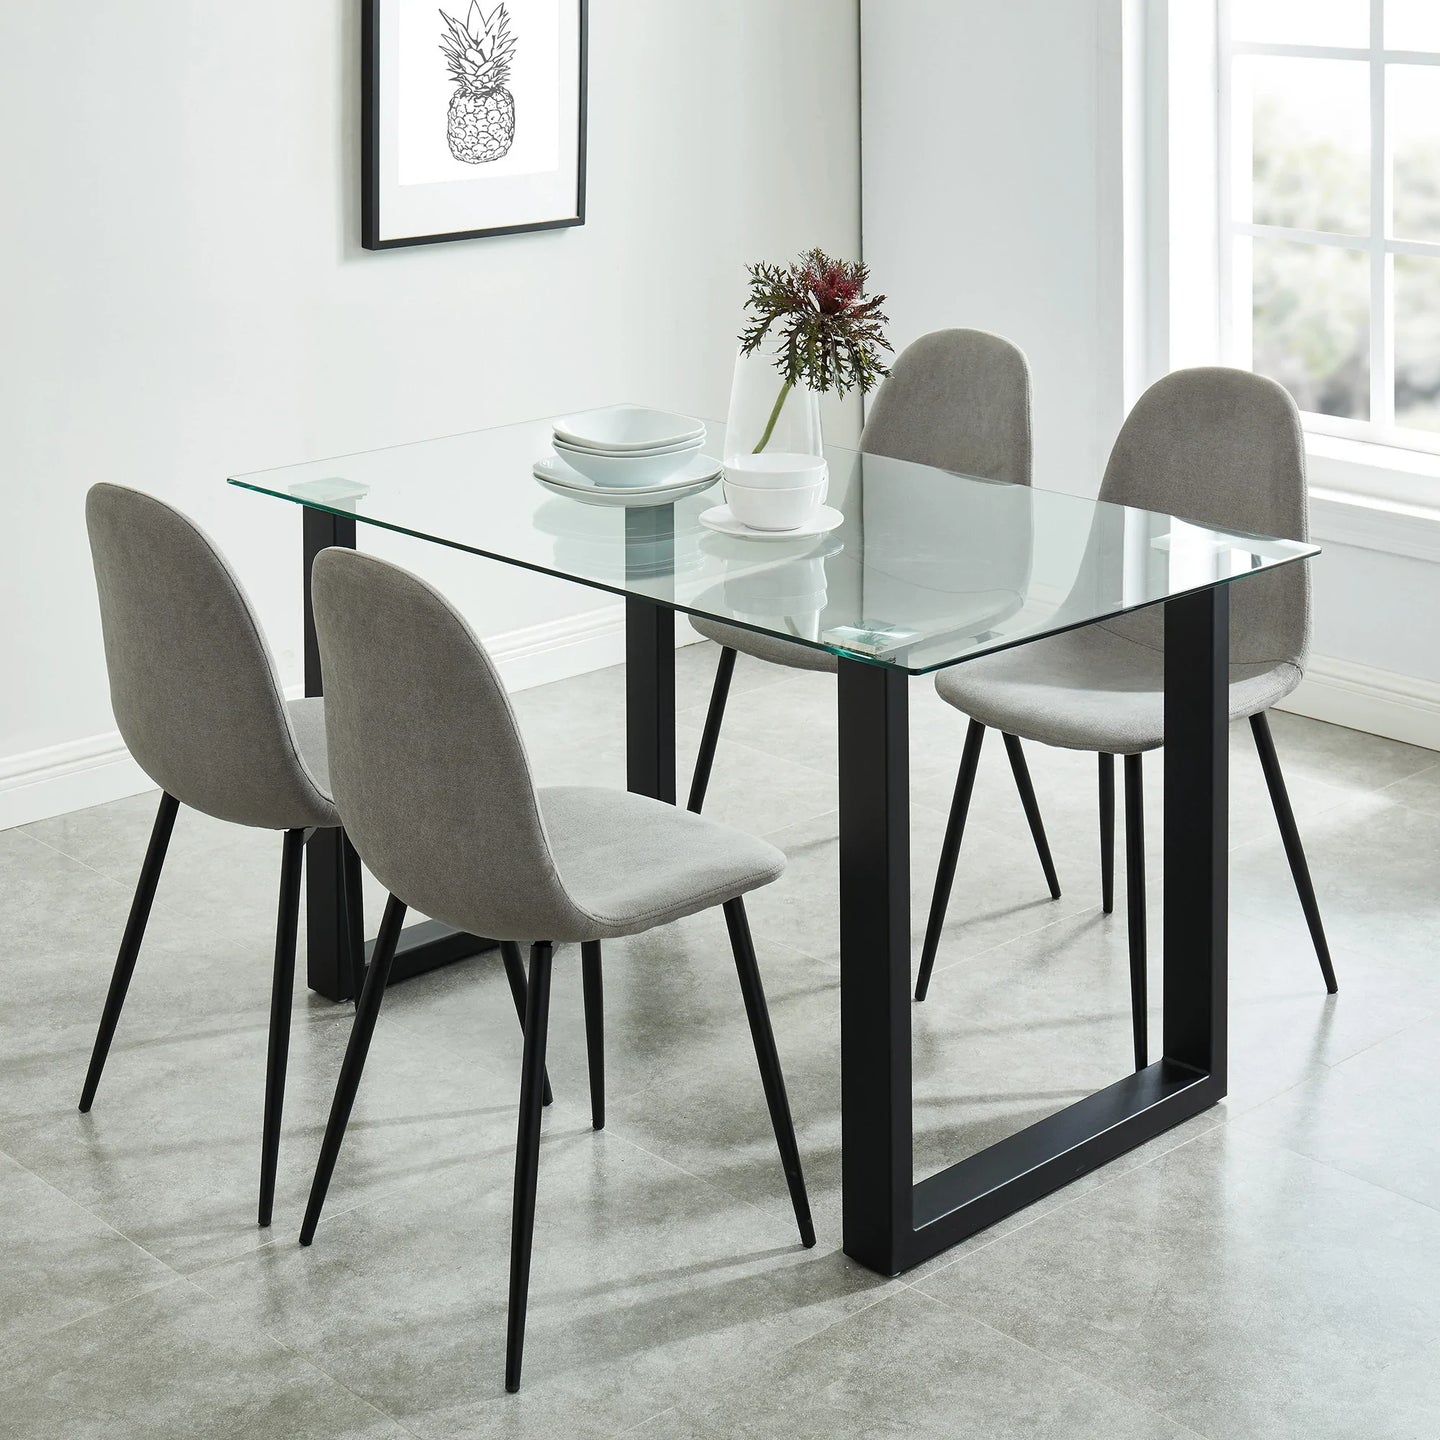 FRANCO BK/OLLY GY-5PC DINING SET - Furniture Depot